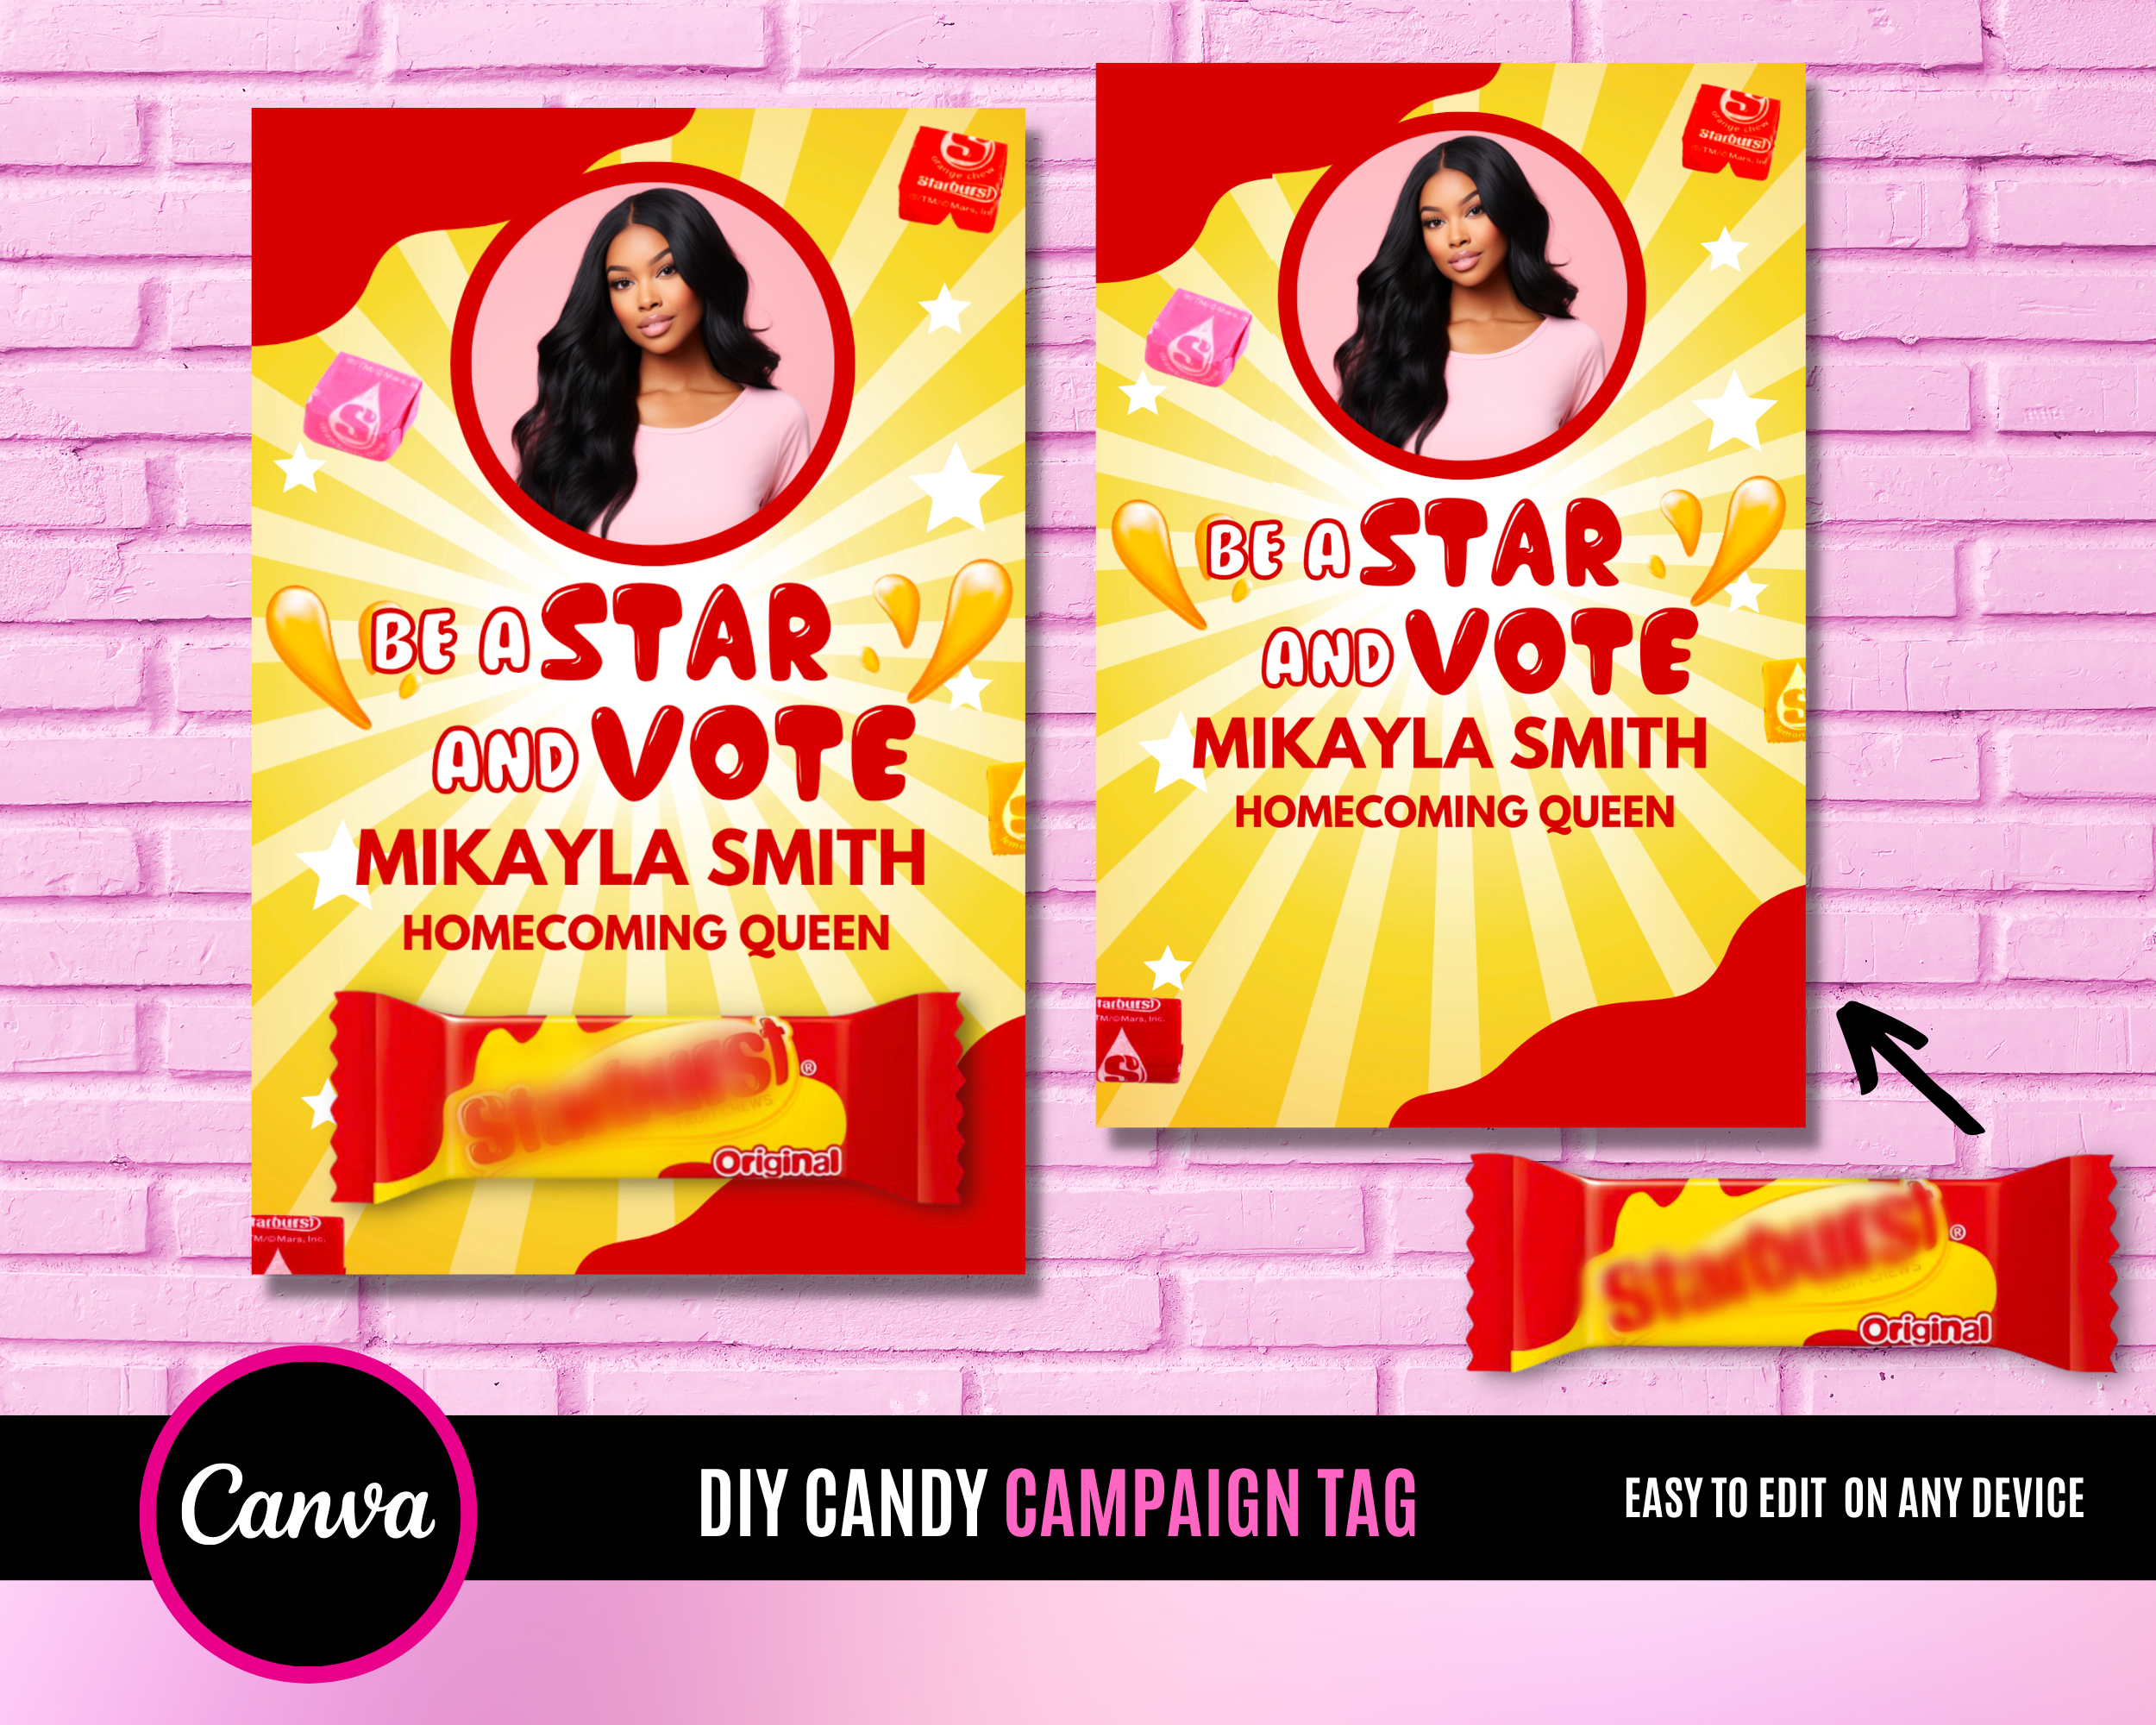 Candy Card for Campaign